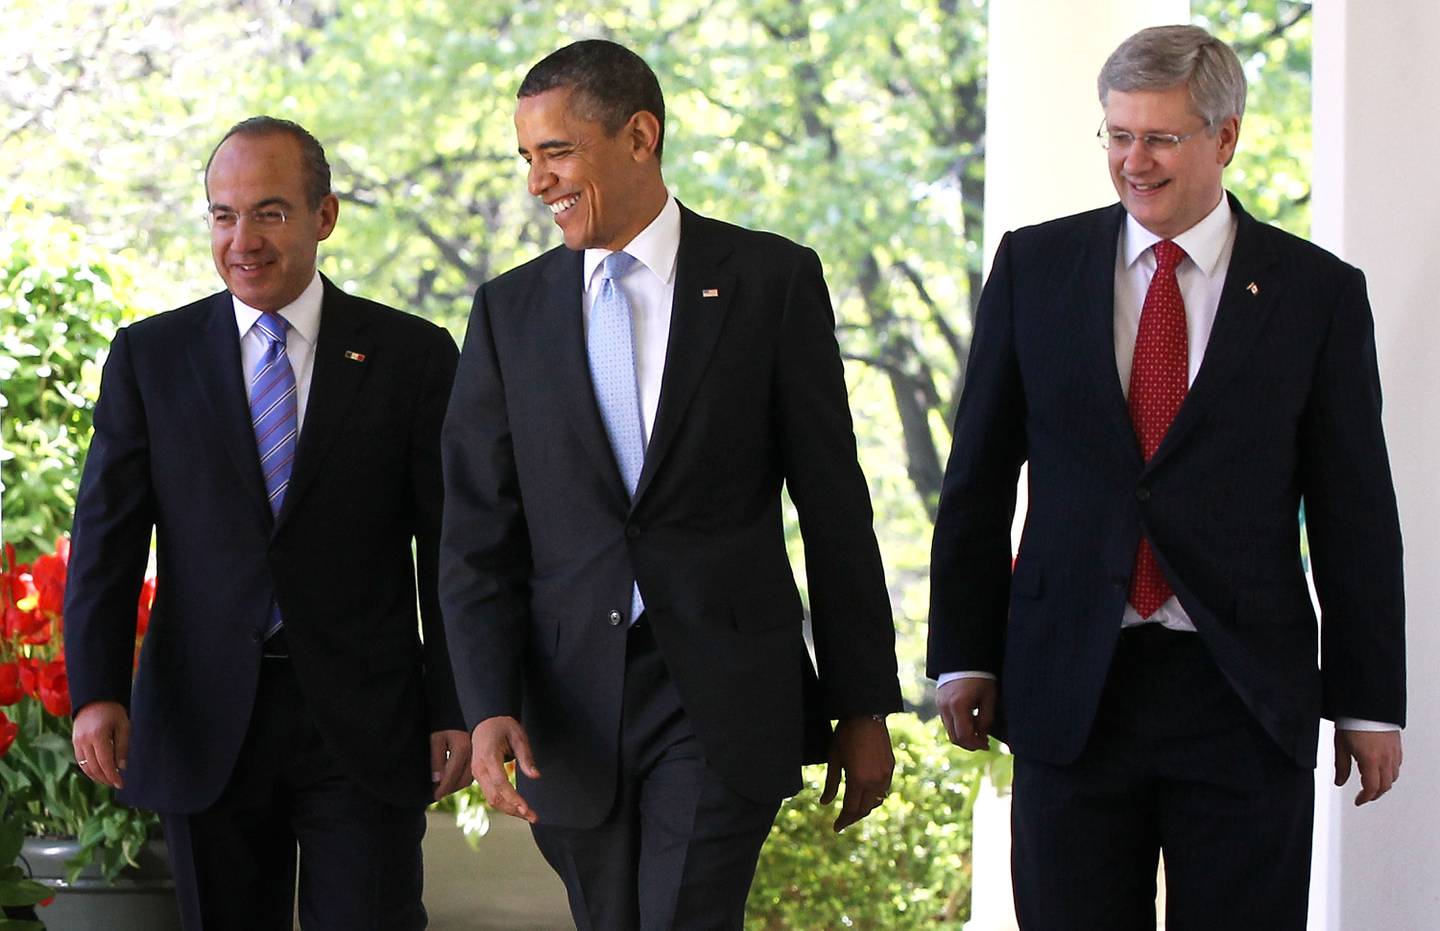 Washington, Dc - April 02: United States President Barack Obama (C), Canadian Prime Minister Stephen Harper (R), And Mexican President Felipe Calderon (Left) In The Rose Garden Of The White House For A Joint Press Conference In The Oval Office Depart From.  April 2, 2012 In Washington, Dc.  Obama Sent His Canadian Delegation To The North American Leaders' Summit (Nals), With Talks On Cooperation Between The Three Countries, The Role Of North America In The United States, As Well As Other Economic, Political And Global Security Issues, According To A White House Press Release. And Hosted Mexican Counterparts.  ,  (Photo By Alex Wong / Getty Images)